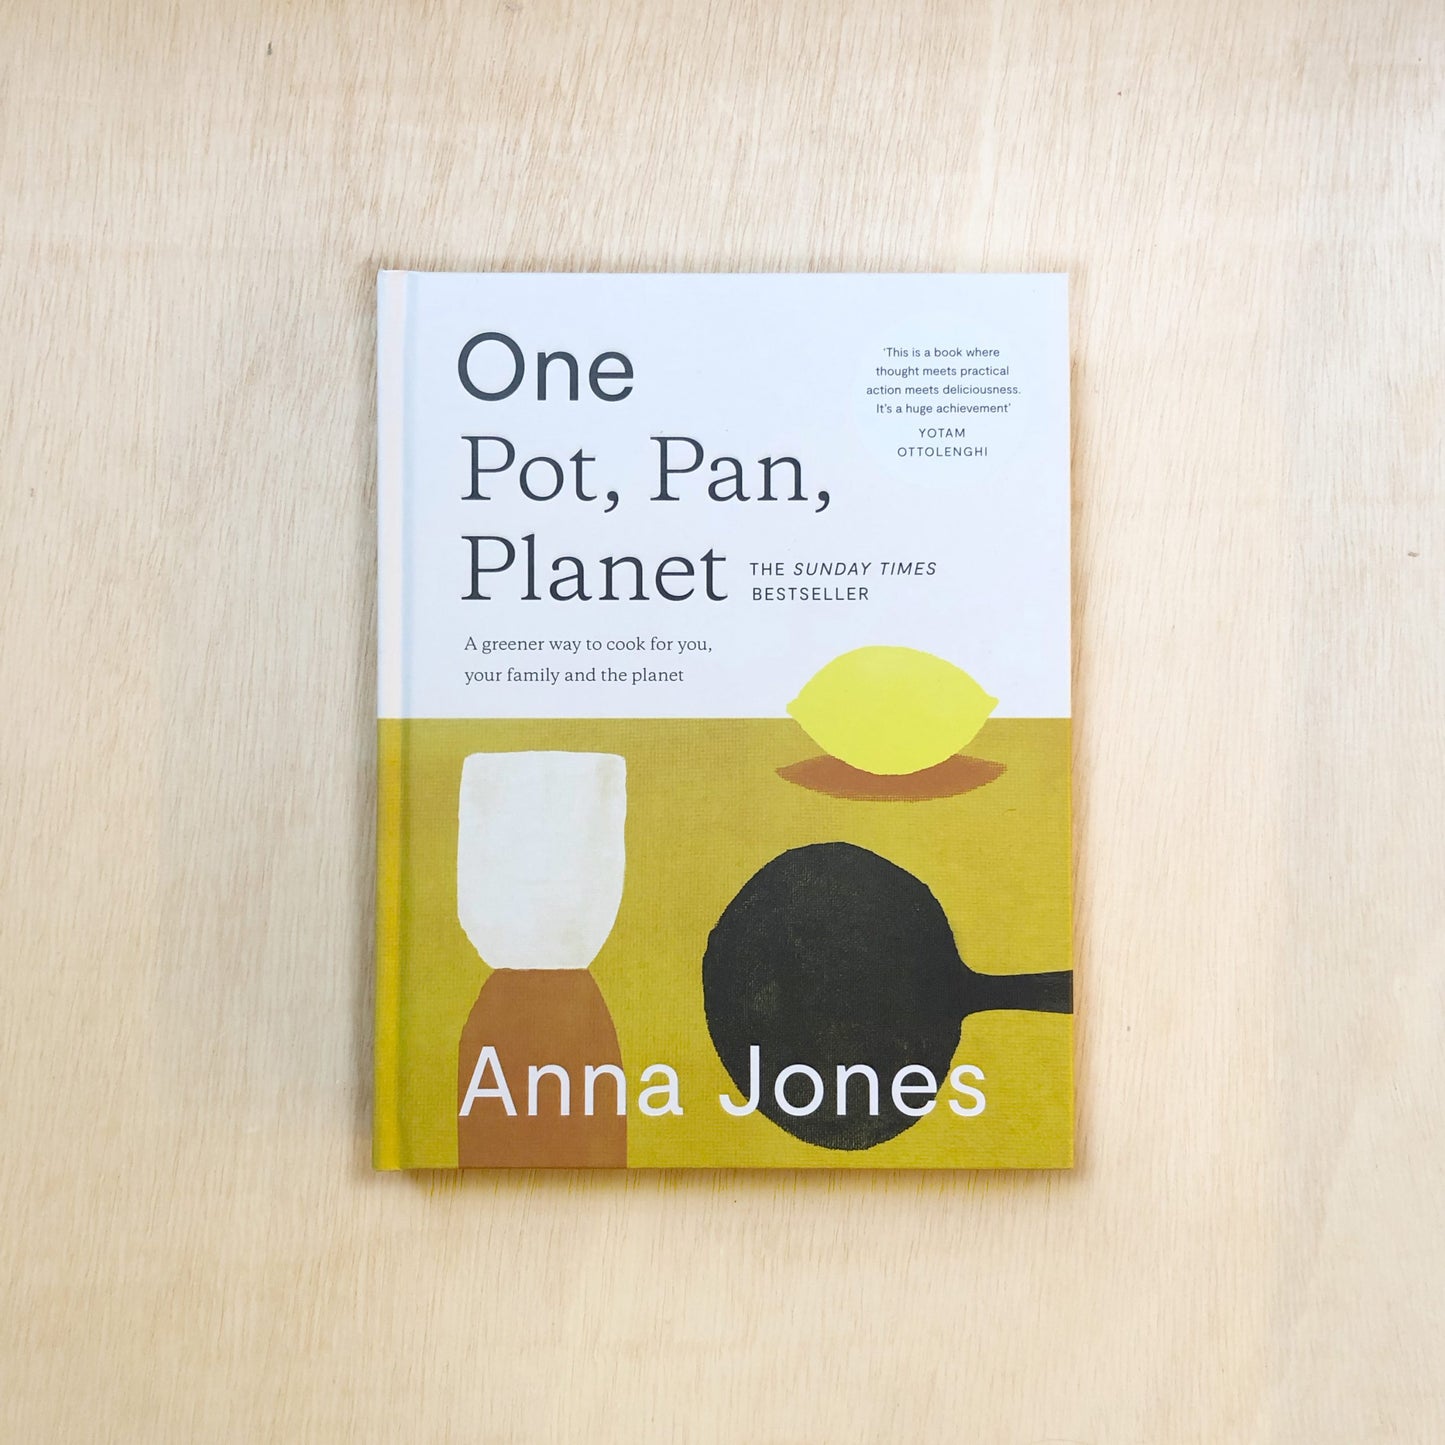 One: Pot, Pan, Planet - A Greener Way to Cook for You, Your Family and the Planet